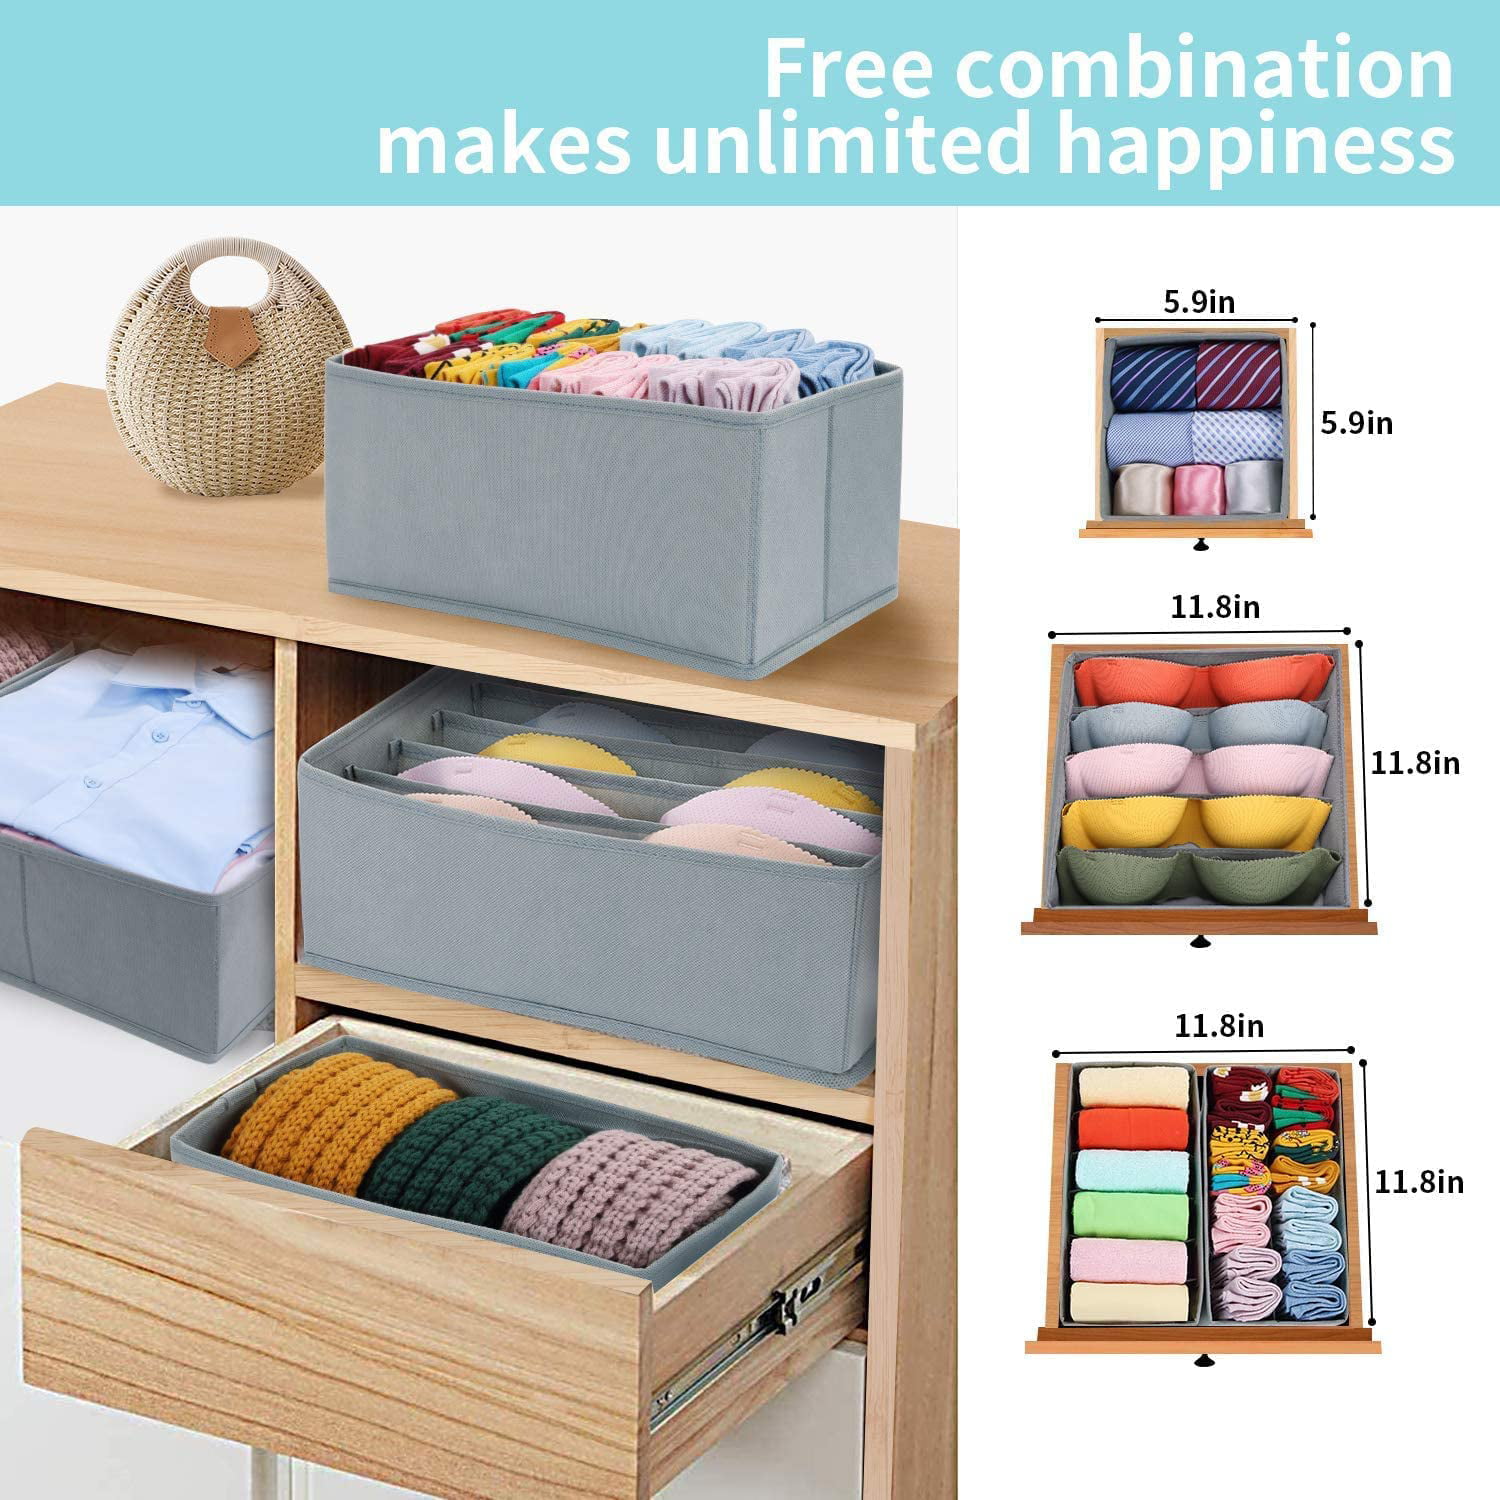  DIMJ Sock Drawer Organizers, Underwear Organizers with 72-Cell,  Dresser Drawer Organizers for Clothing, Closet Organizers and Sock  Organizer Bin for Socks, Belts, 3 Packs (Grey) : Home & Kitchen